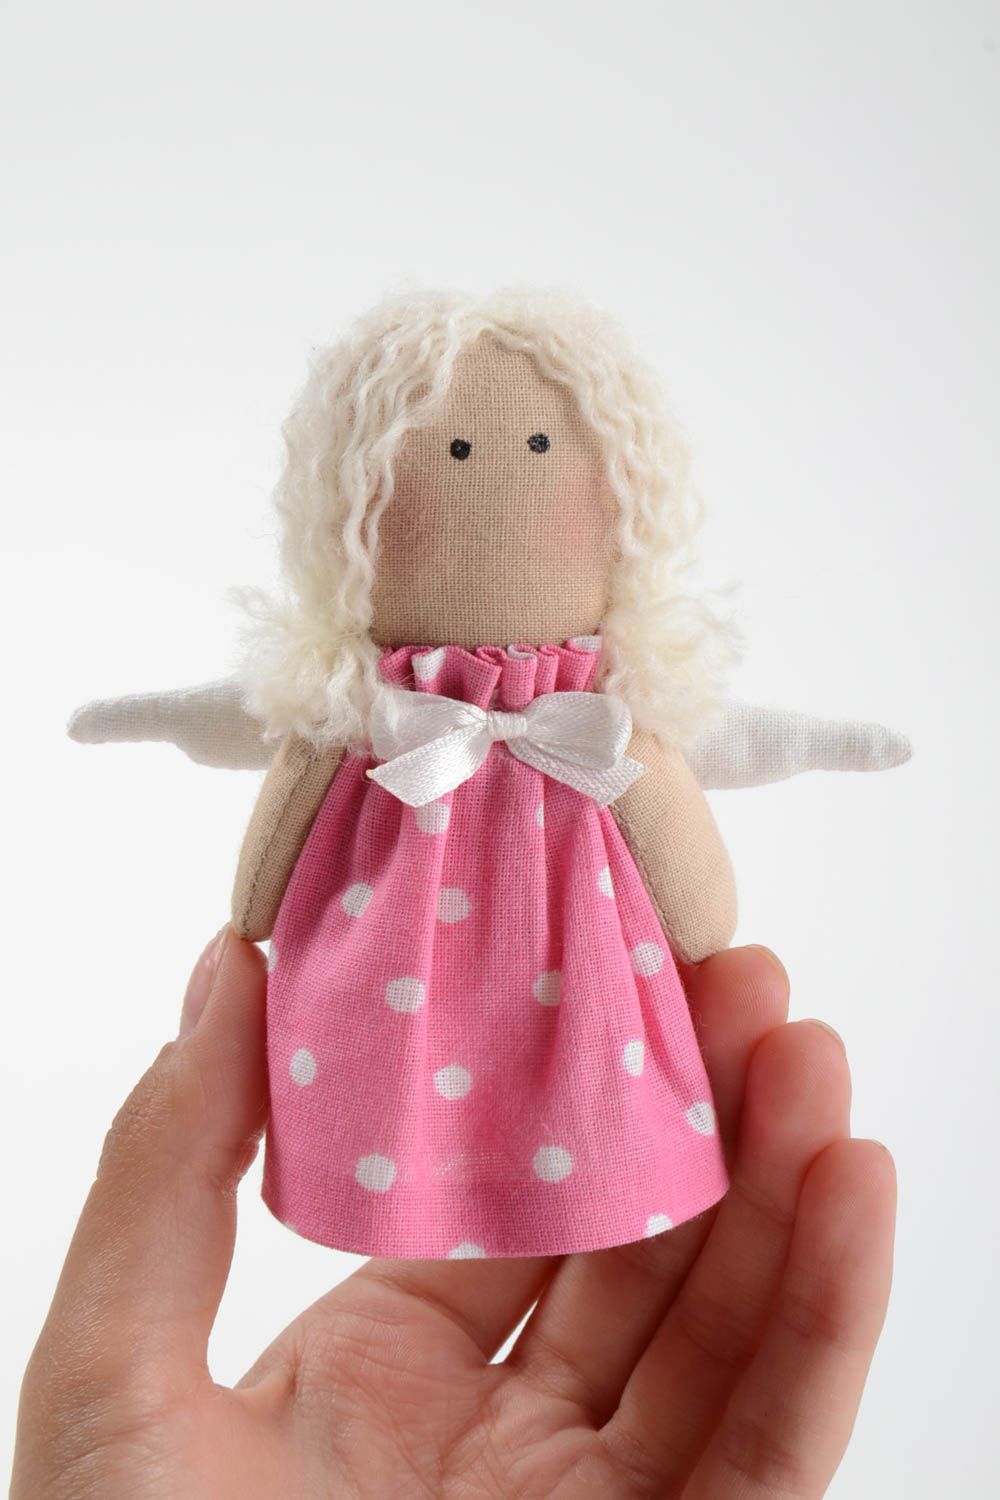 Small handmade soft toy collectible rag doll fabric stuffed toy designs photo 5